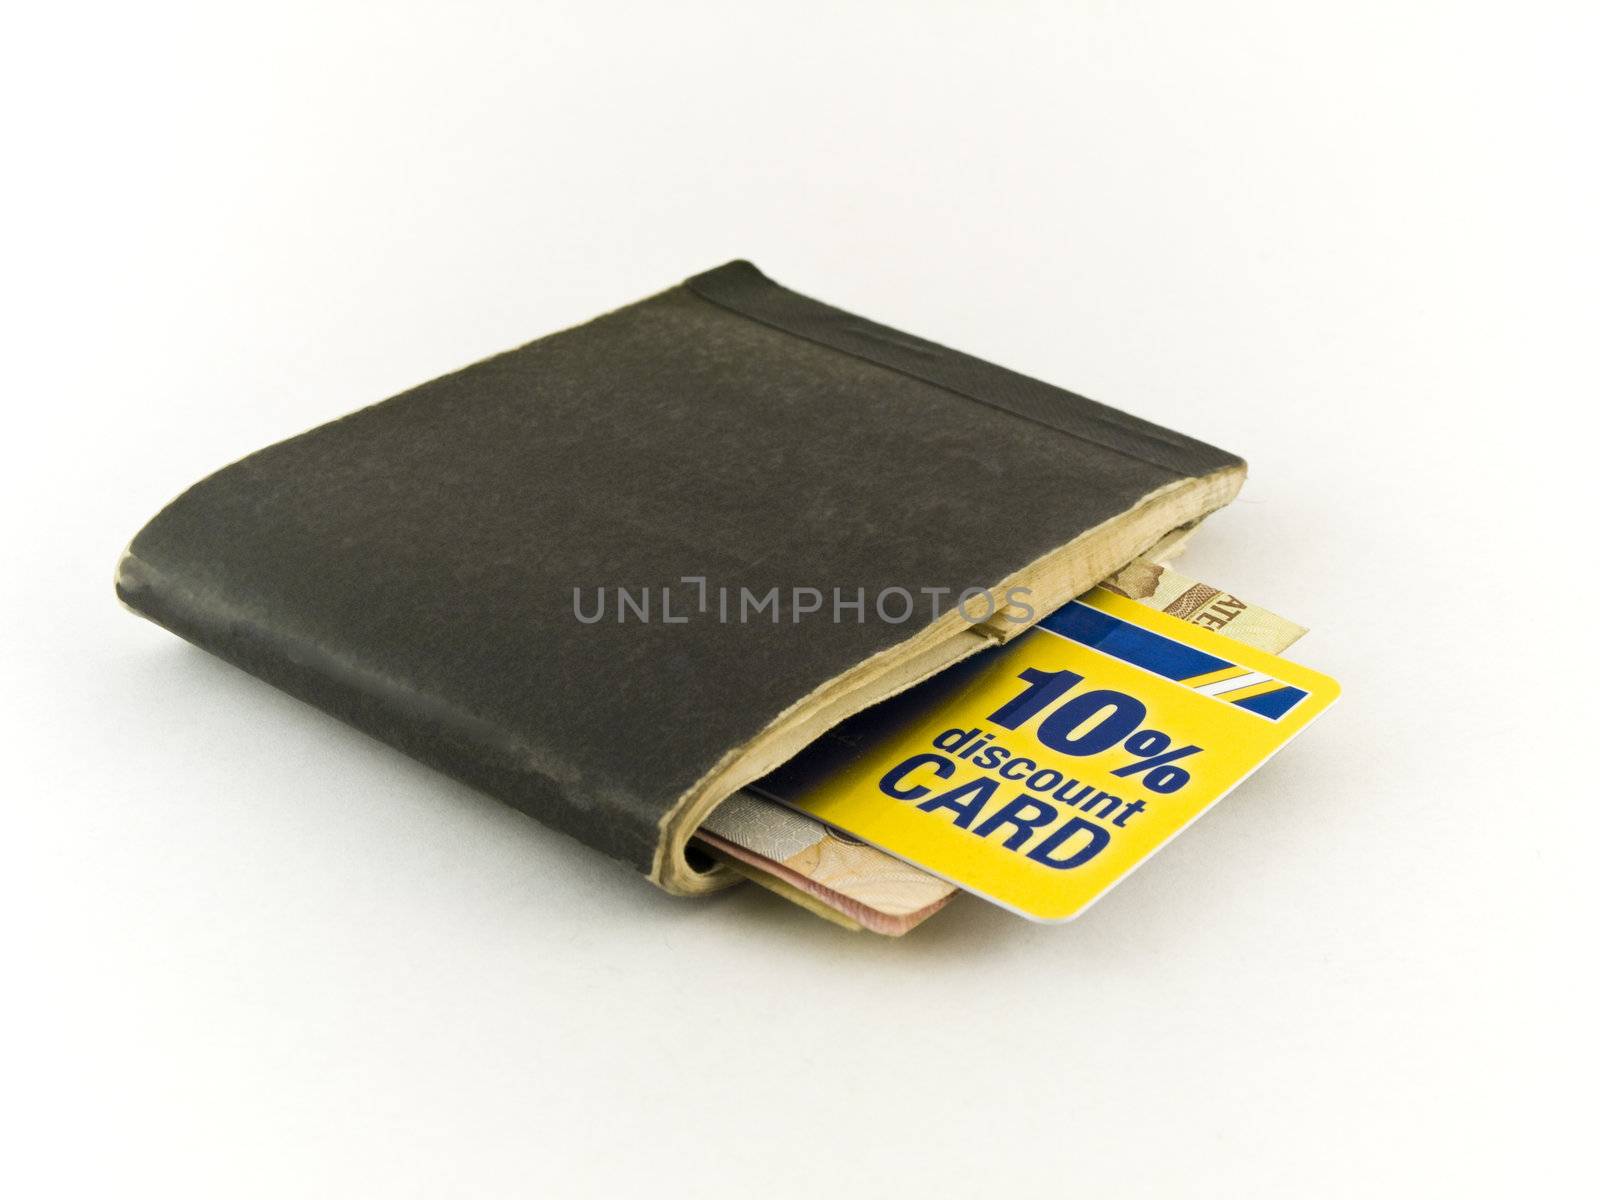 Old Chequebook and Discount Credit Card on White Background by bobbigmac